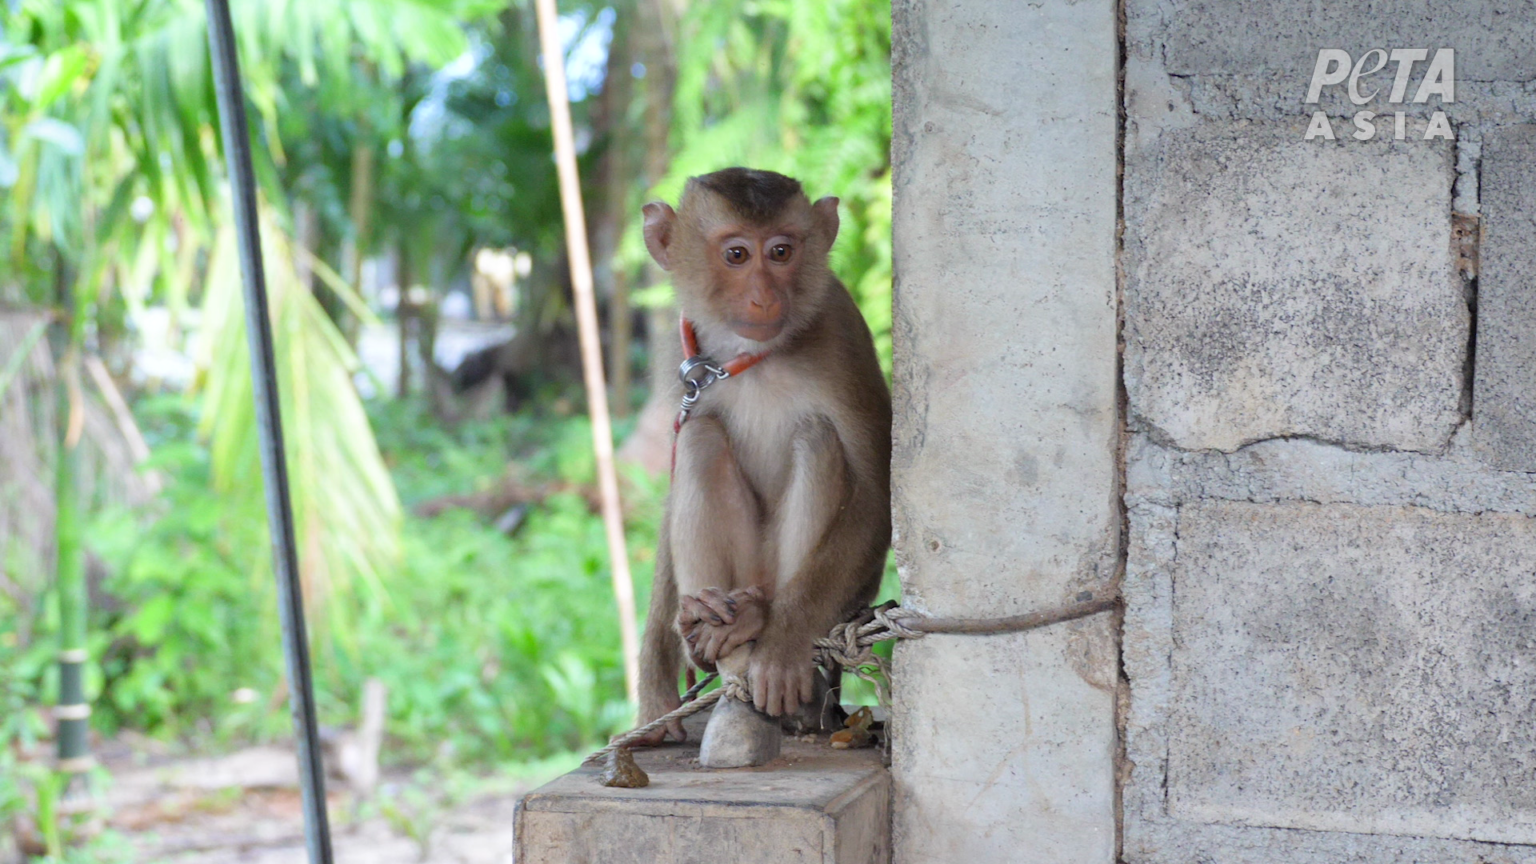 Monkeys chained 5 Urge Whole Foods to Ban the Sale of Coconut Milk From Thailand